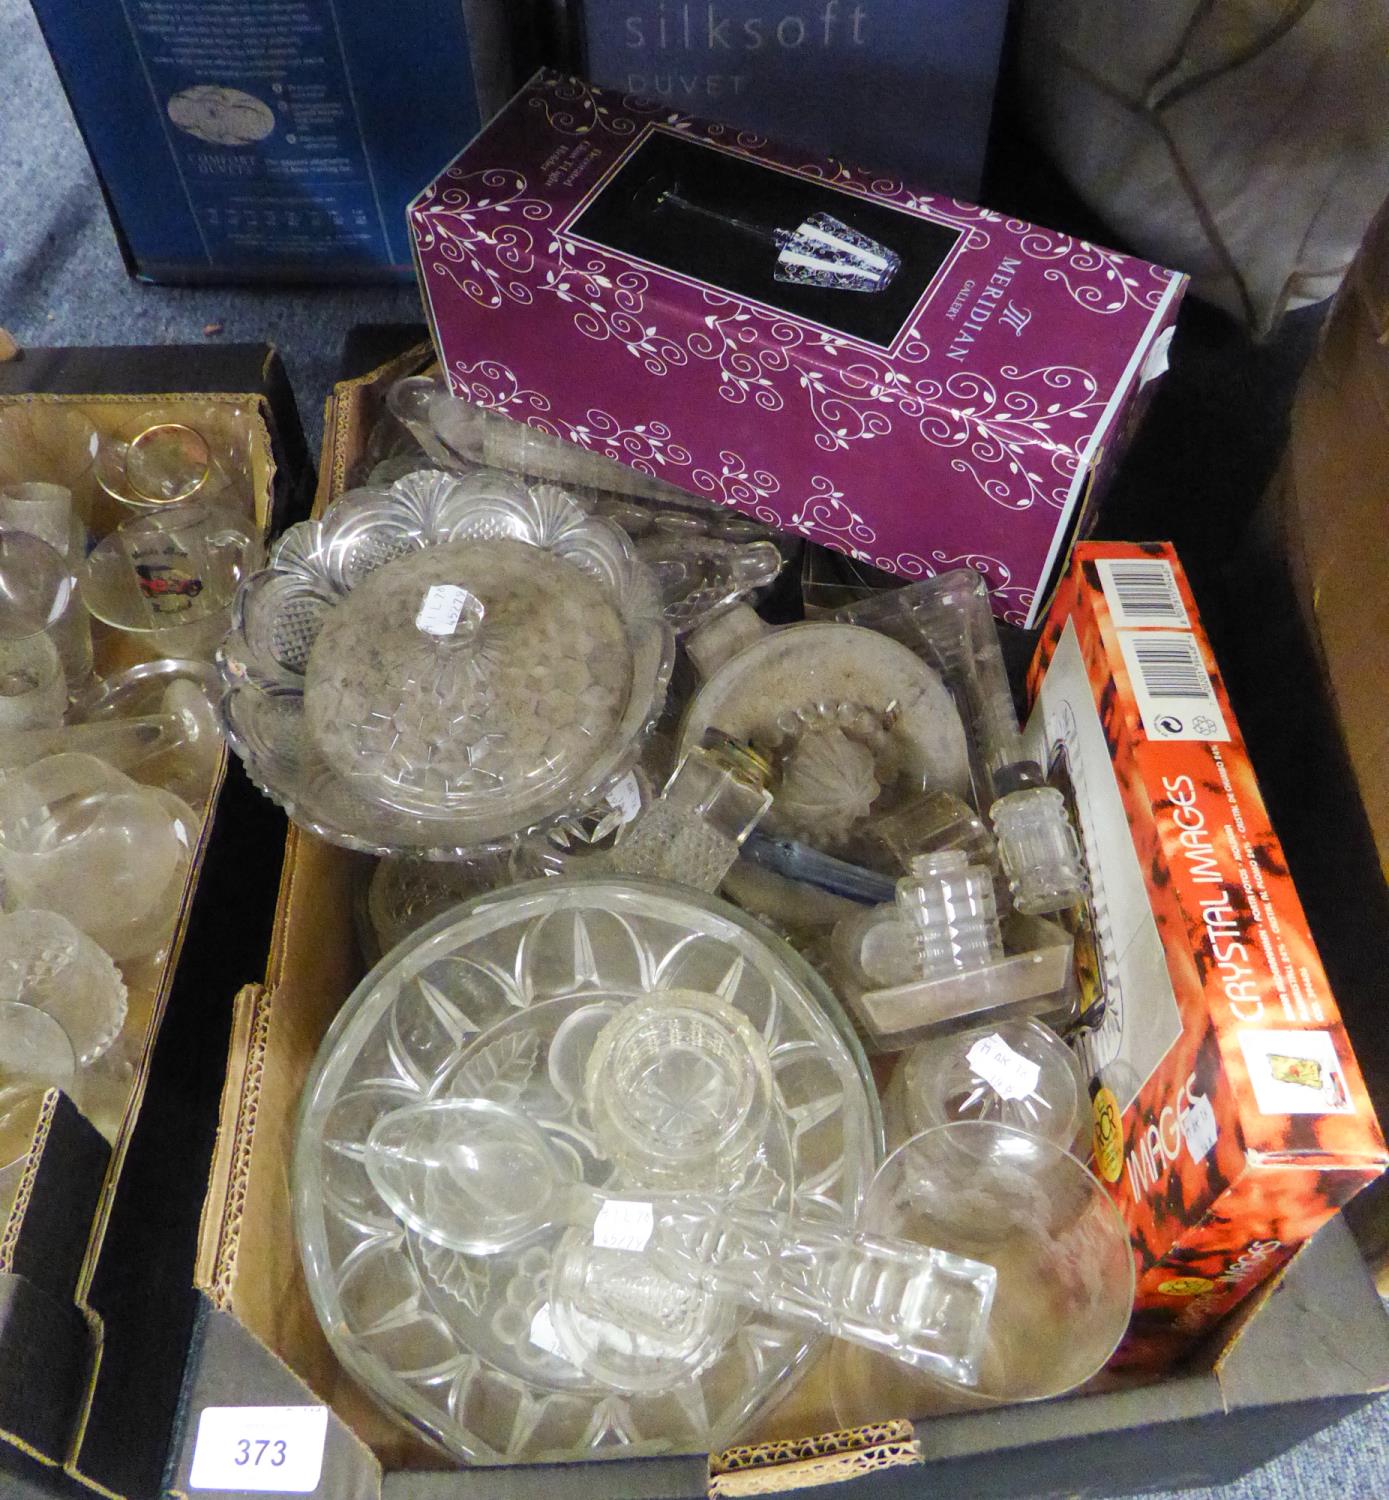 QUANTITY OF MISCELLANEOUS GLASS WARES, MOSTLY MOULDED